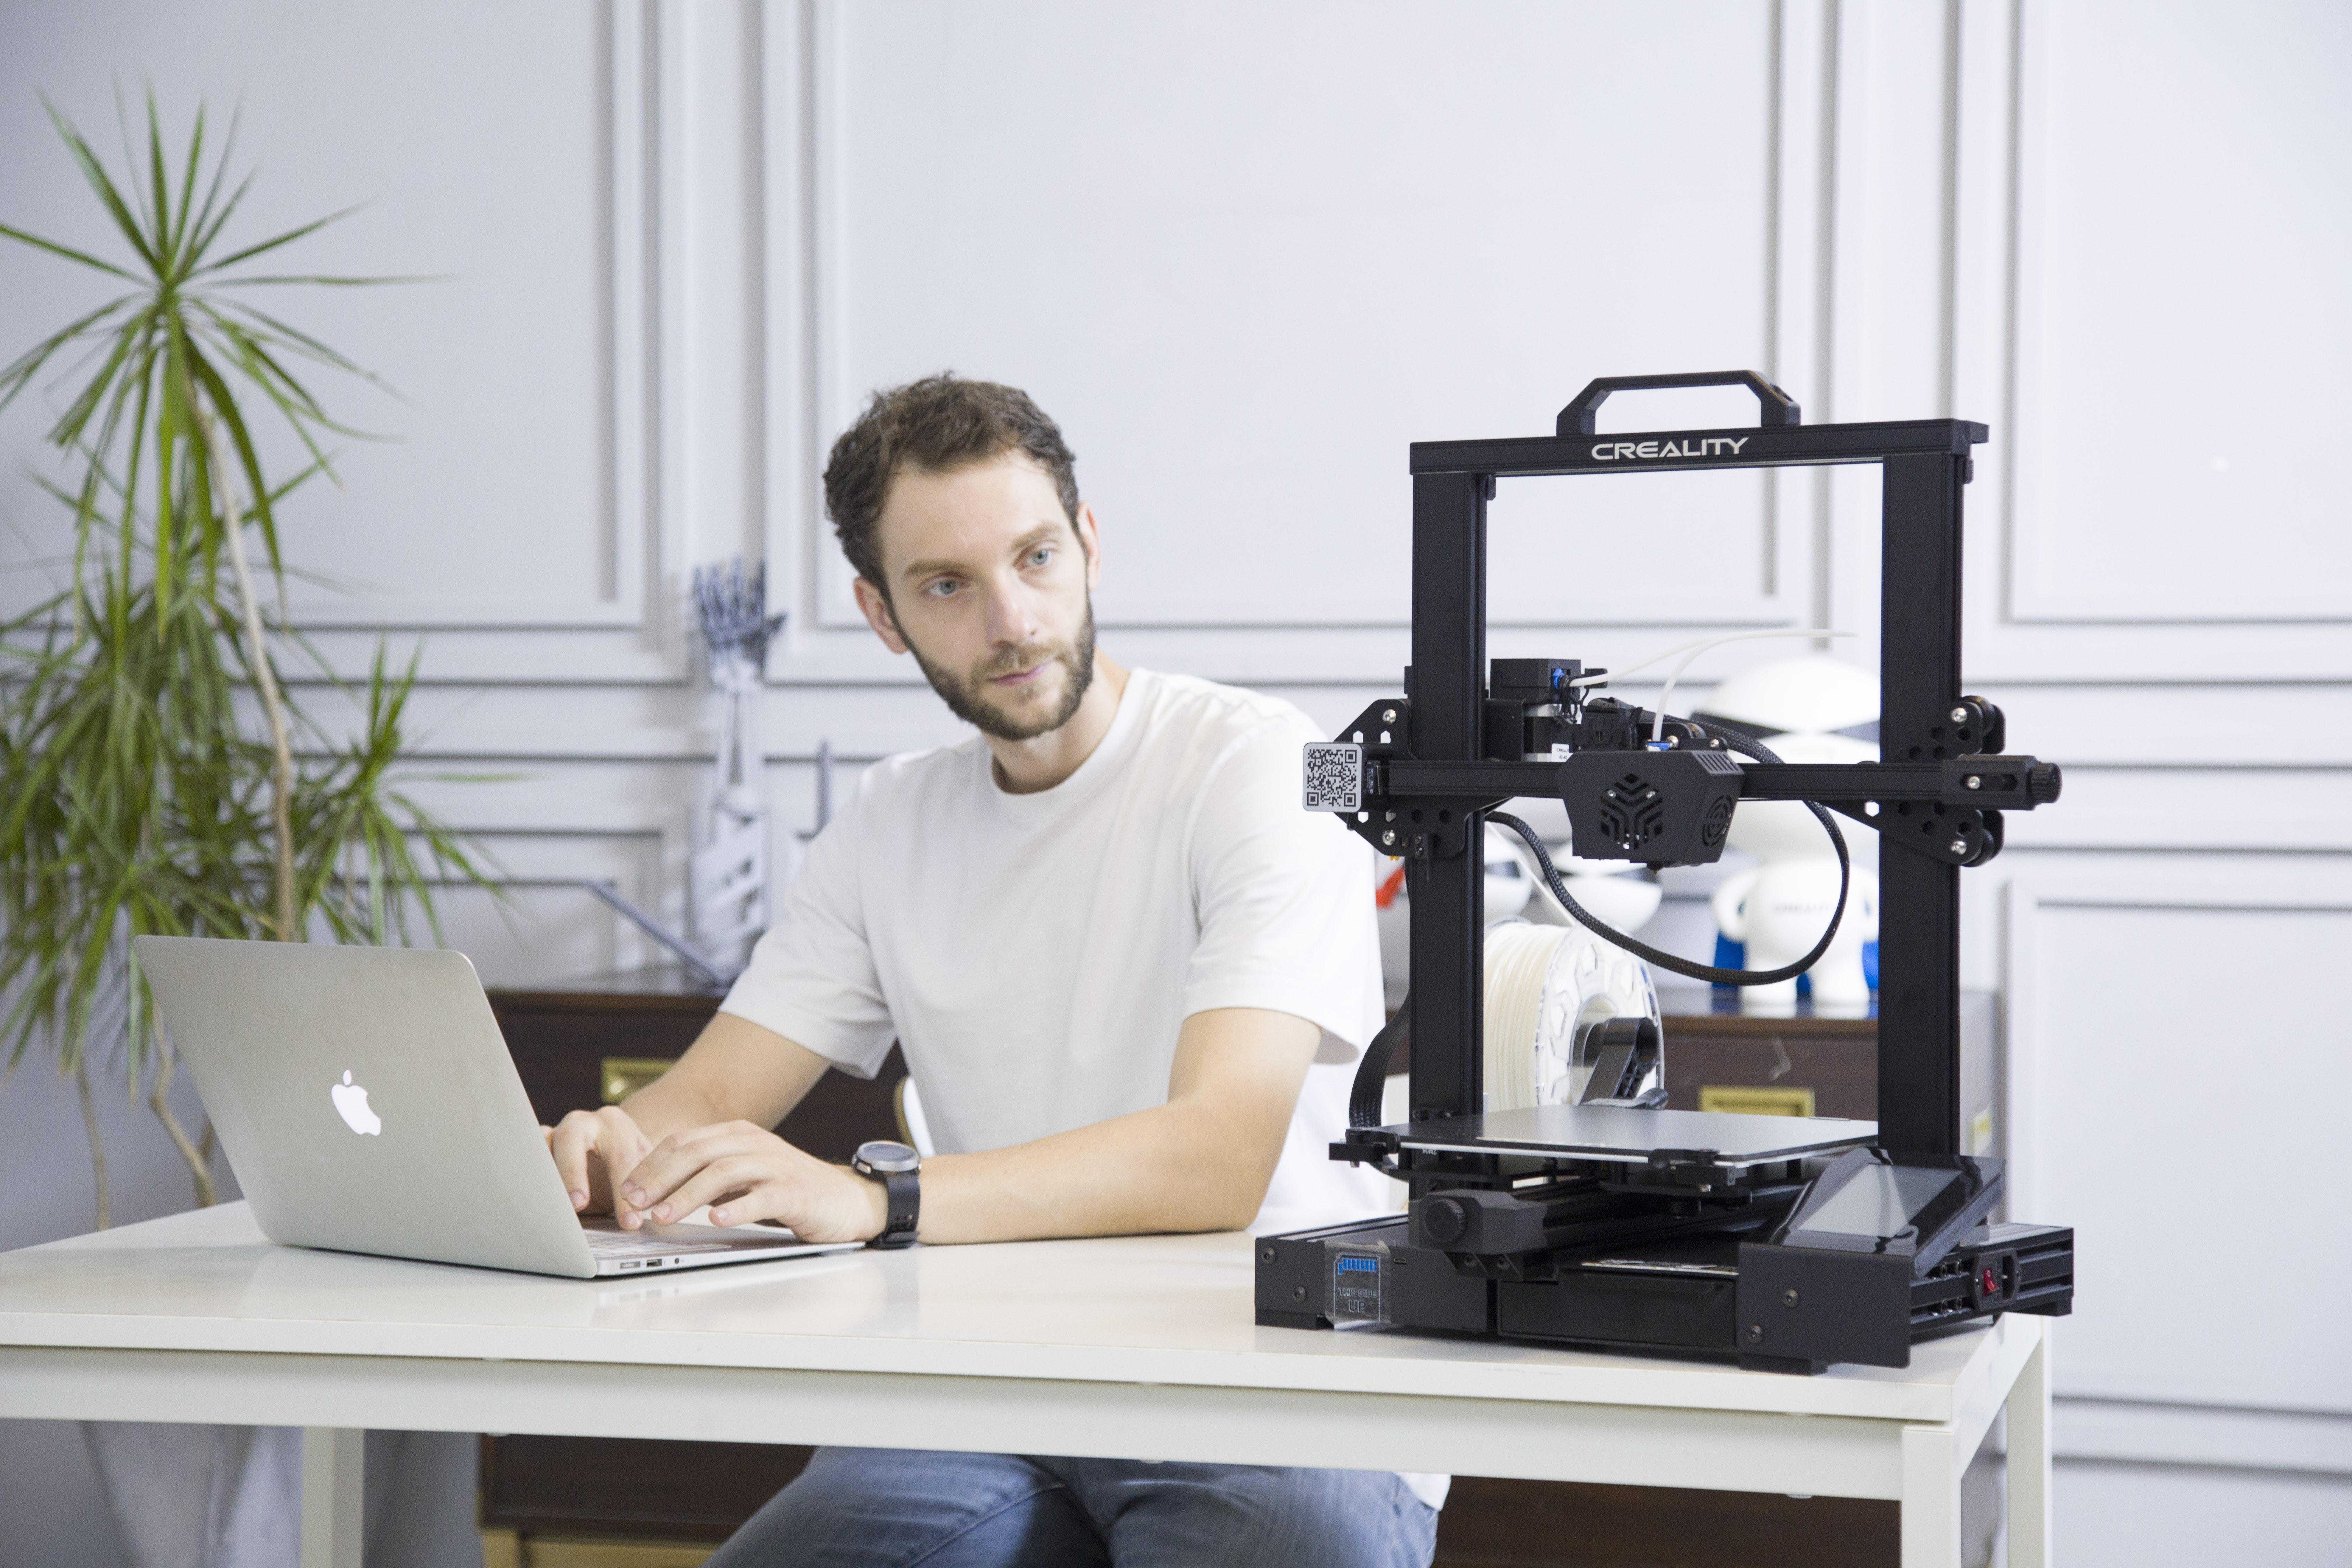 Creality announces its first 3D printer - CR-6 SE - 3D Printing Industry